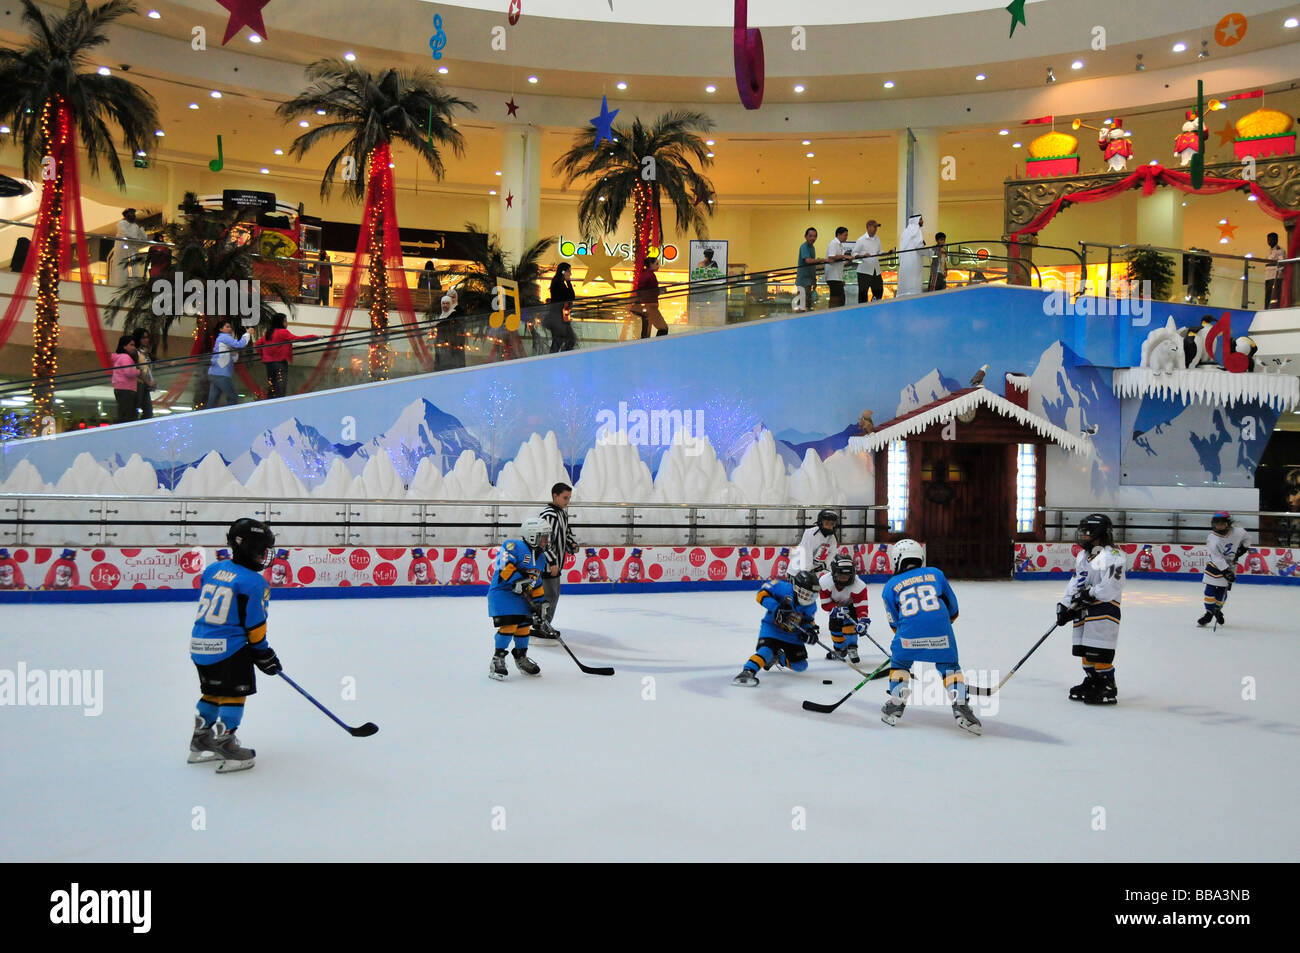 Kids playing ice hockey on the ice rink in the Al Ain Mall, Al Ain, Abu Dhabi, United Arab Emirates, Arabia, the Orient, Middle Stock Photo